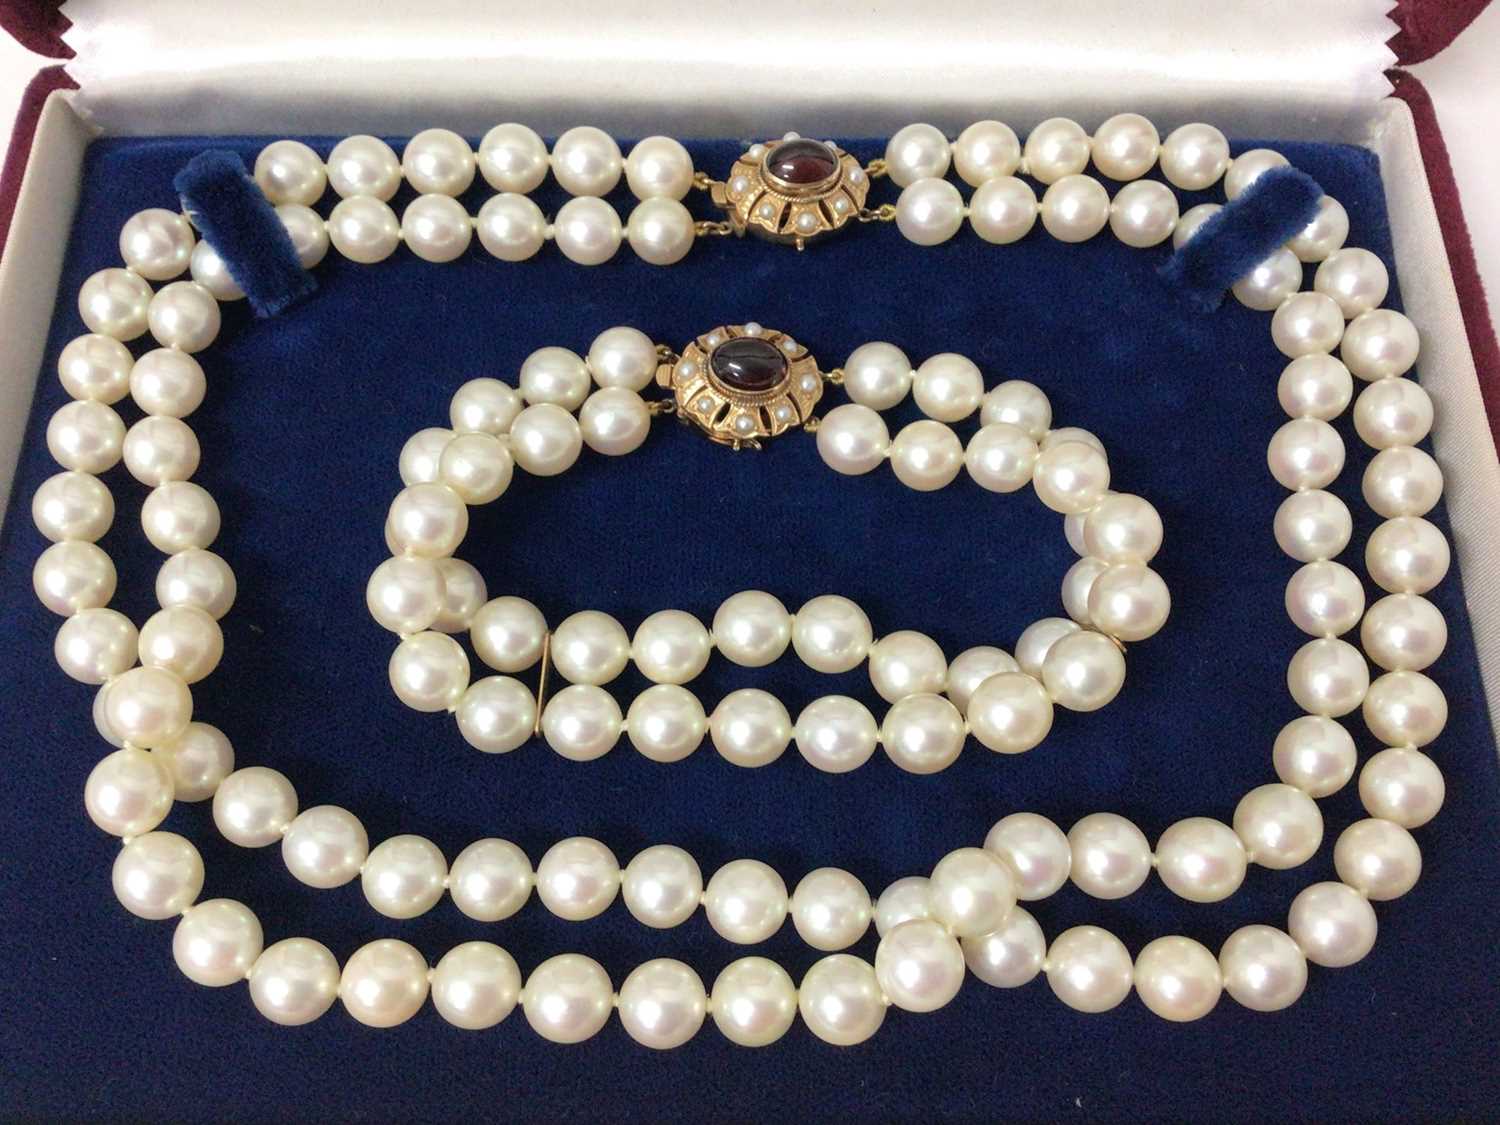 Cultured pearl two strand necklace and bracelet, each with two strings of 8mm cultured pearls on a g - Image 2 of 4